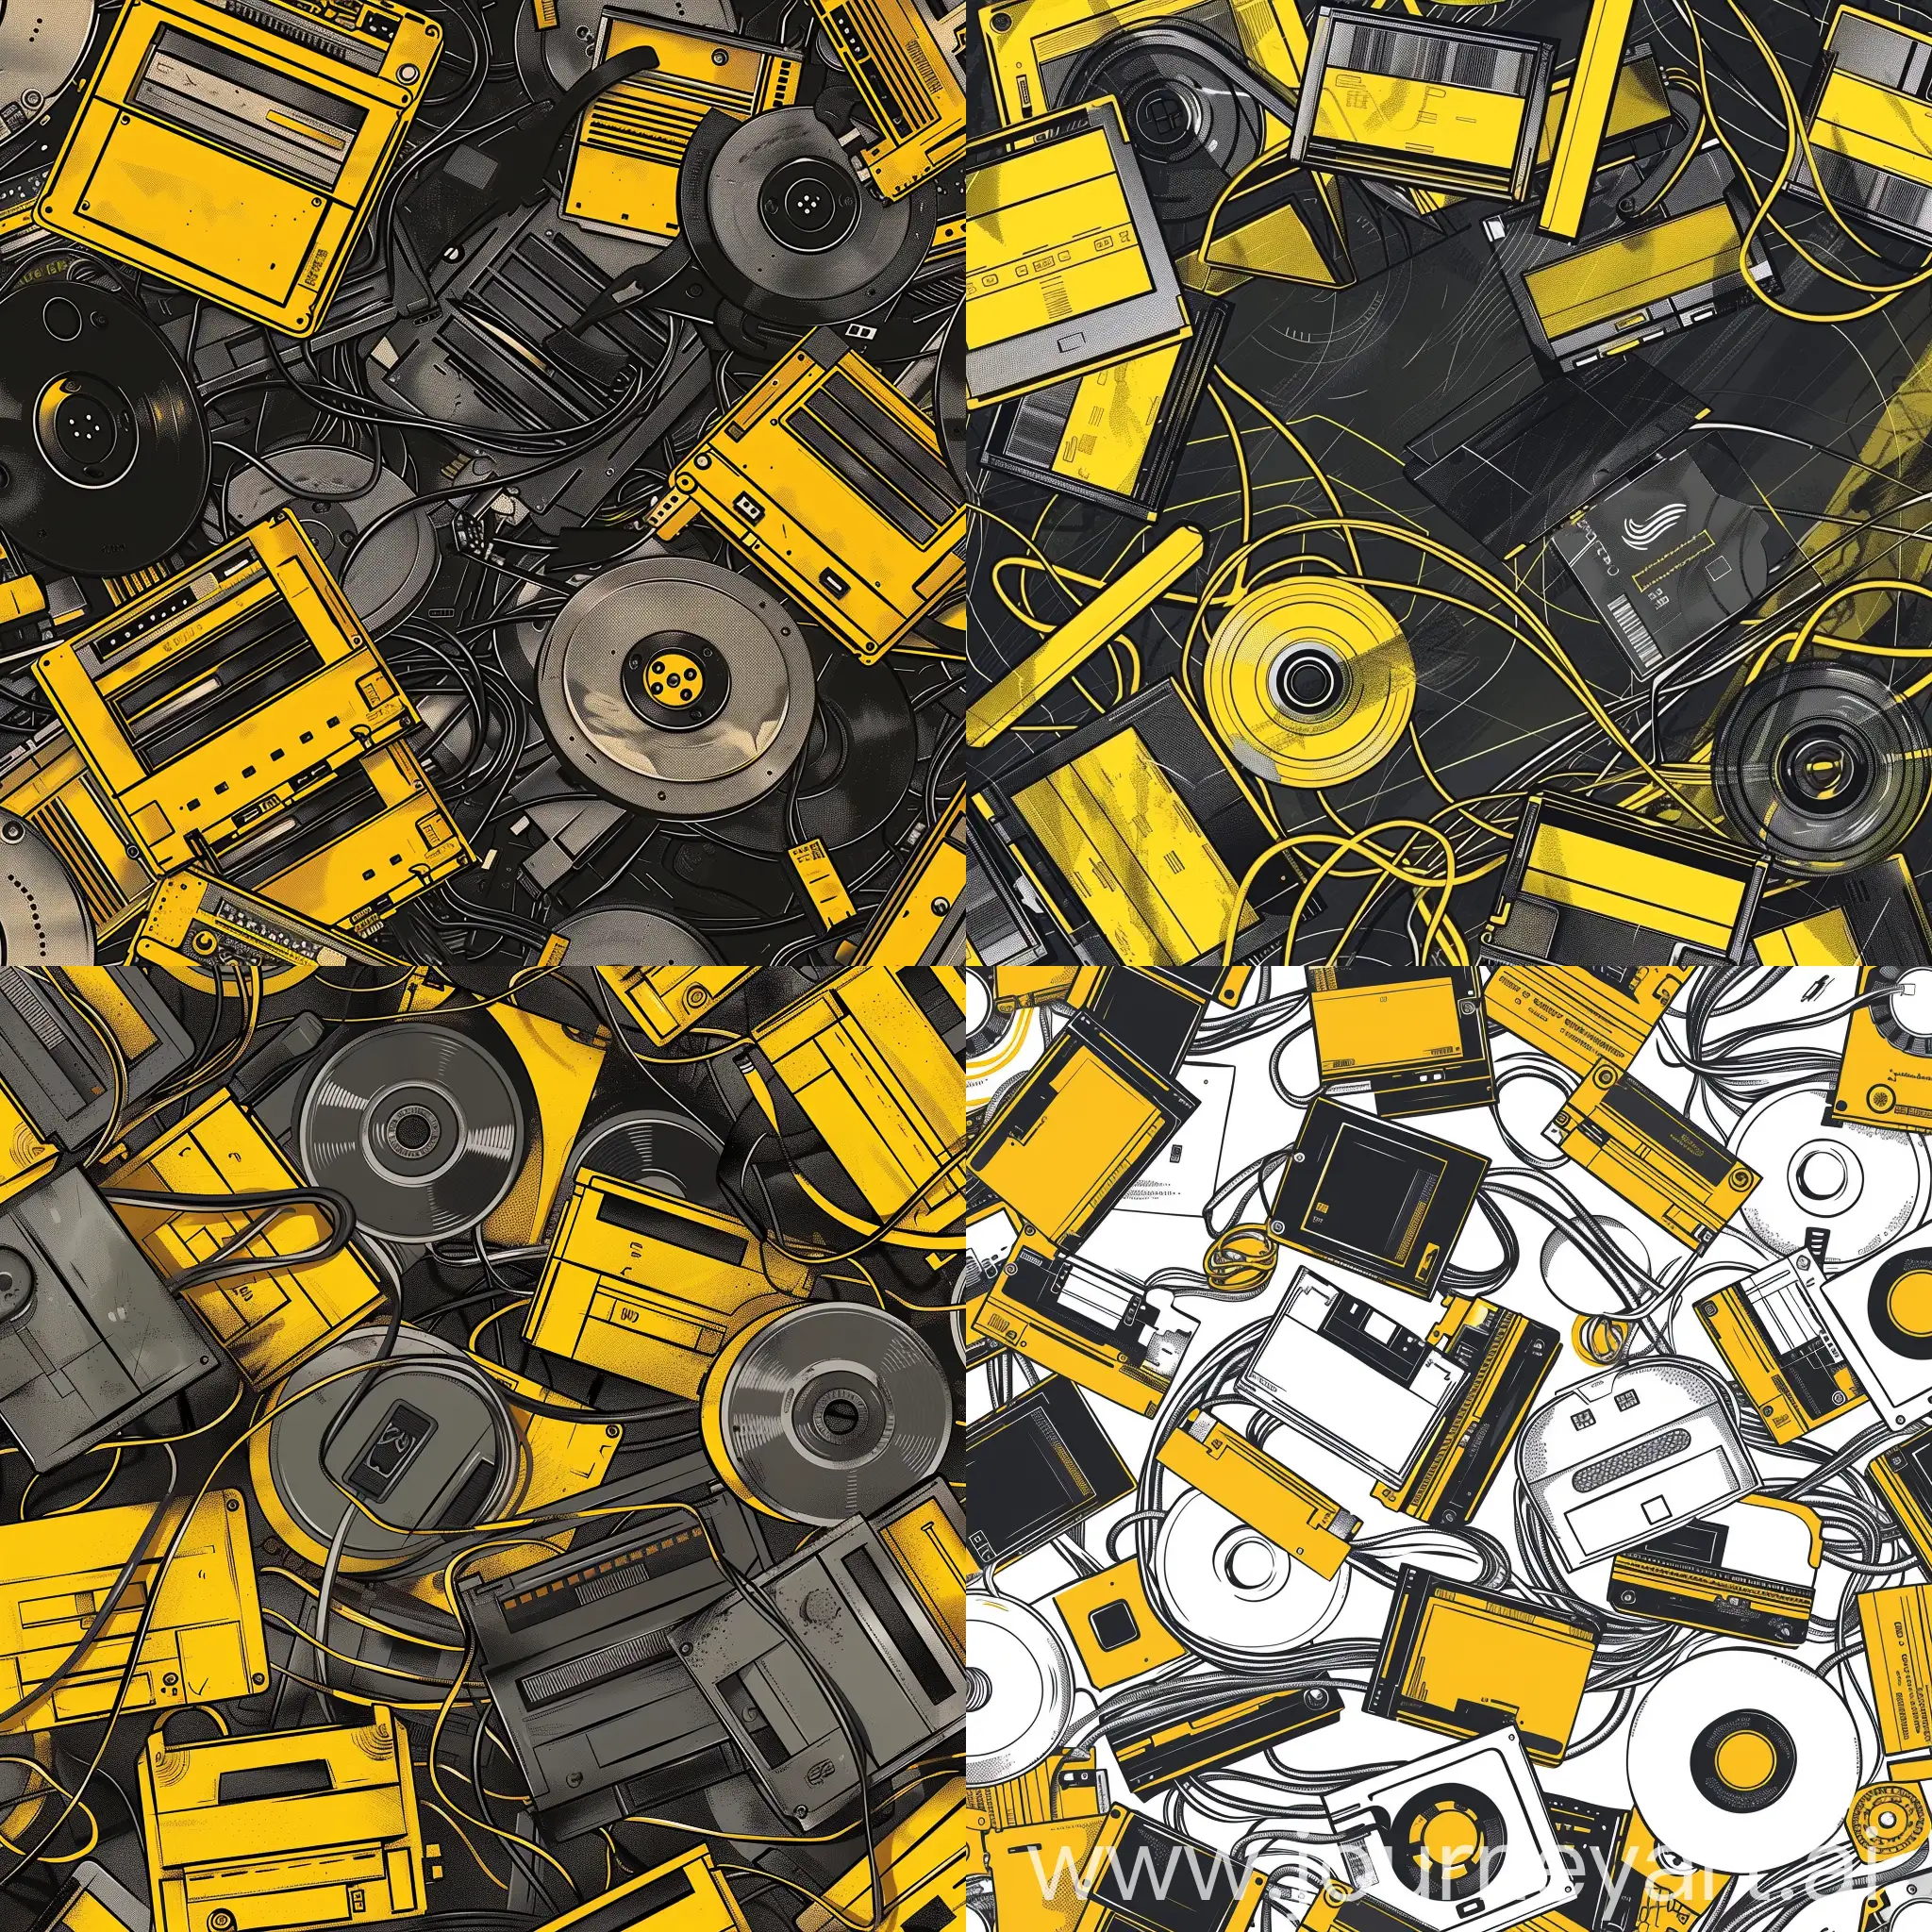 Draw an background of old floppies, HDDs, wires, and cimputers. yellow and black colors, in a sketch style.